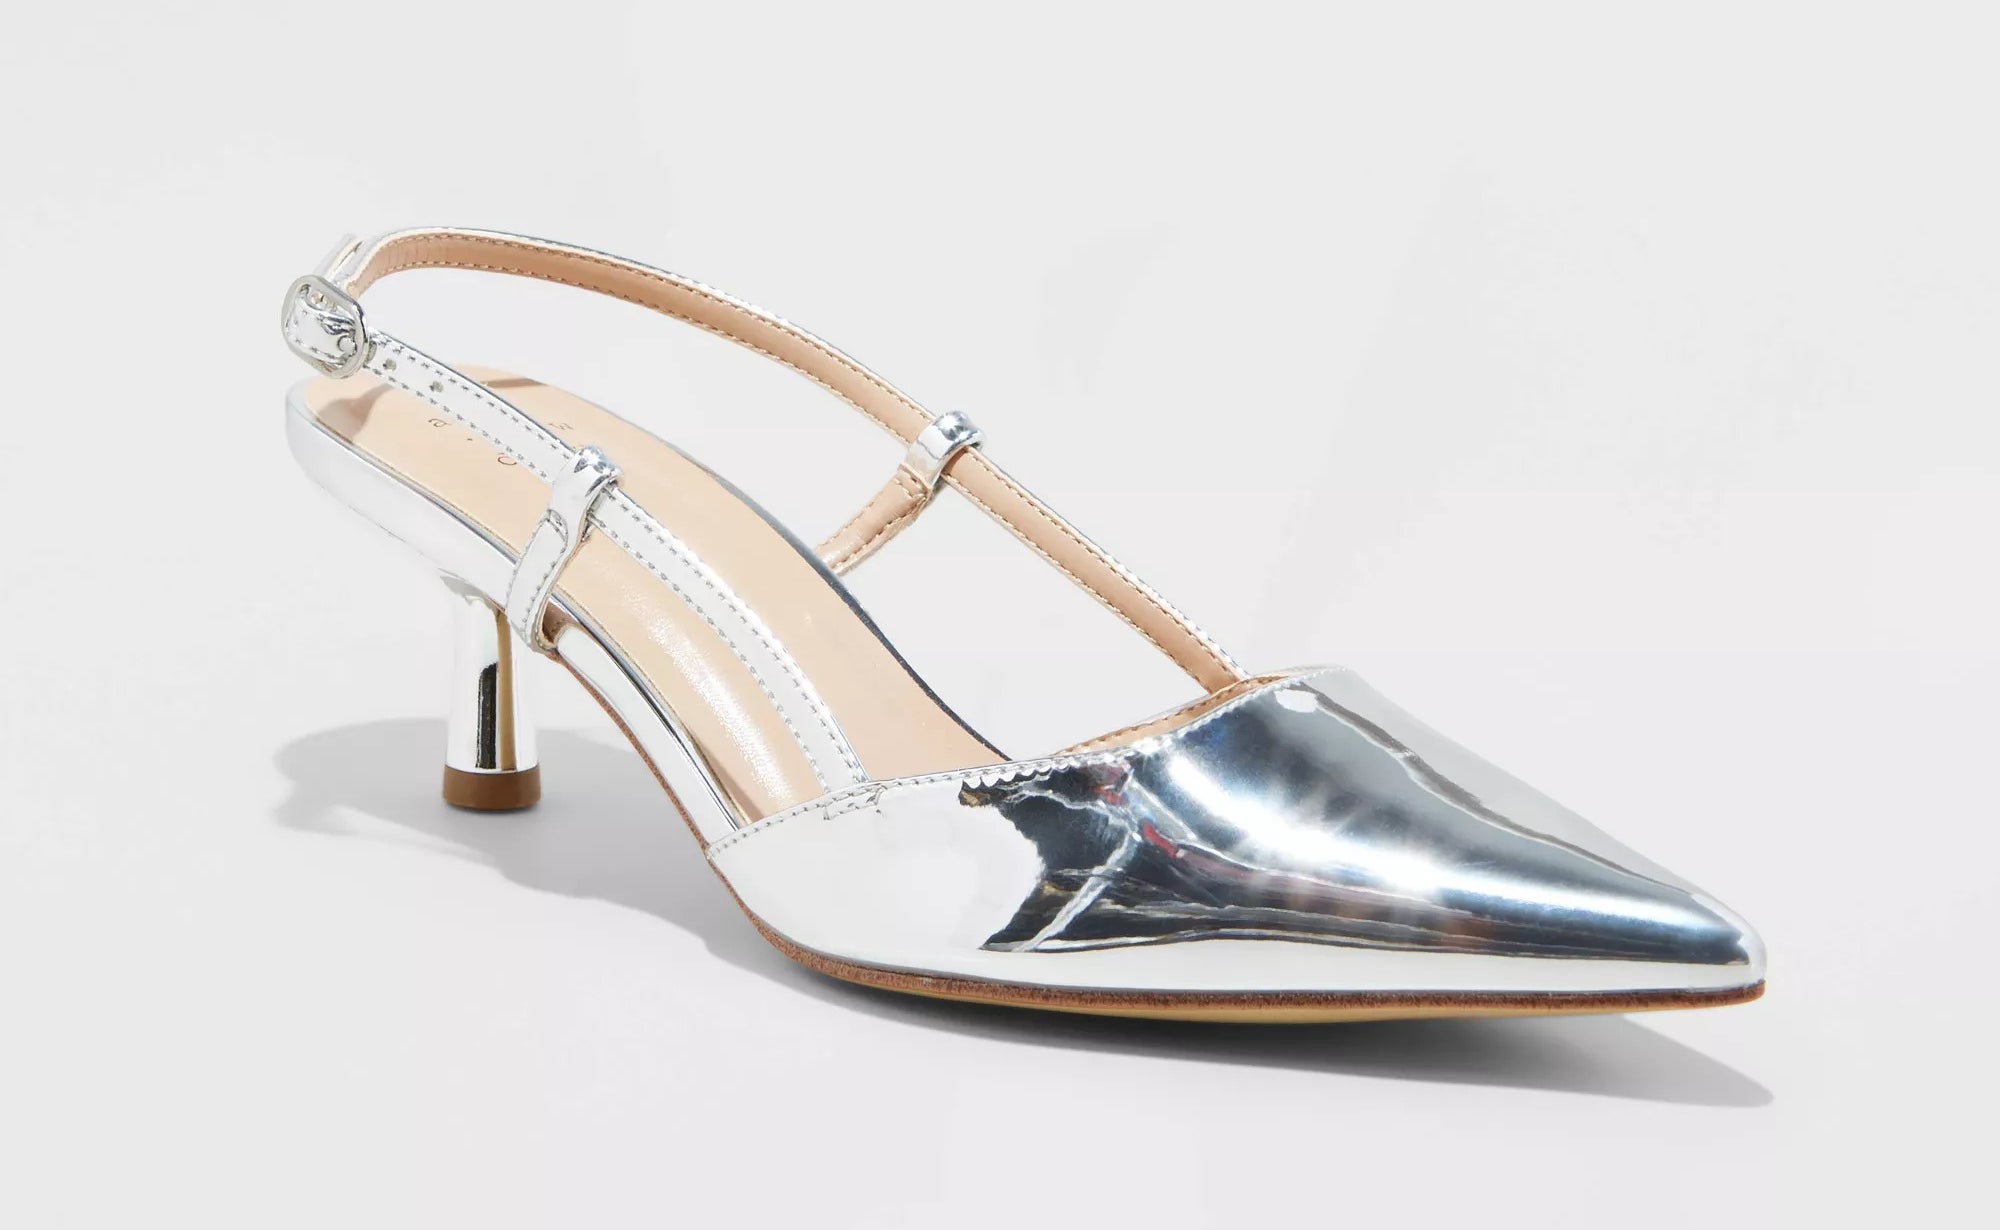 The pointed toe, slingback shoes in reflective silver